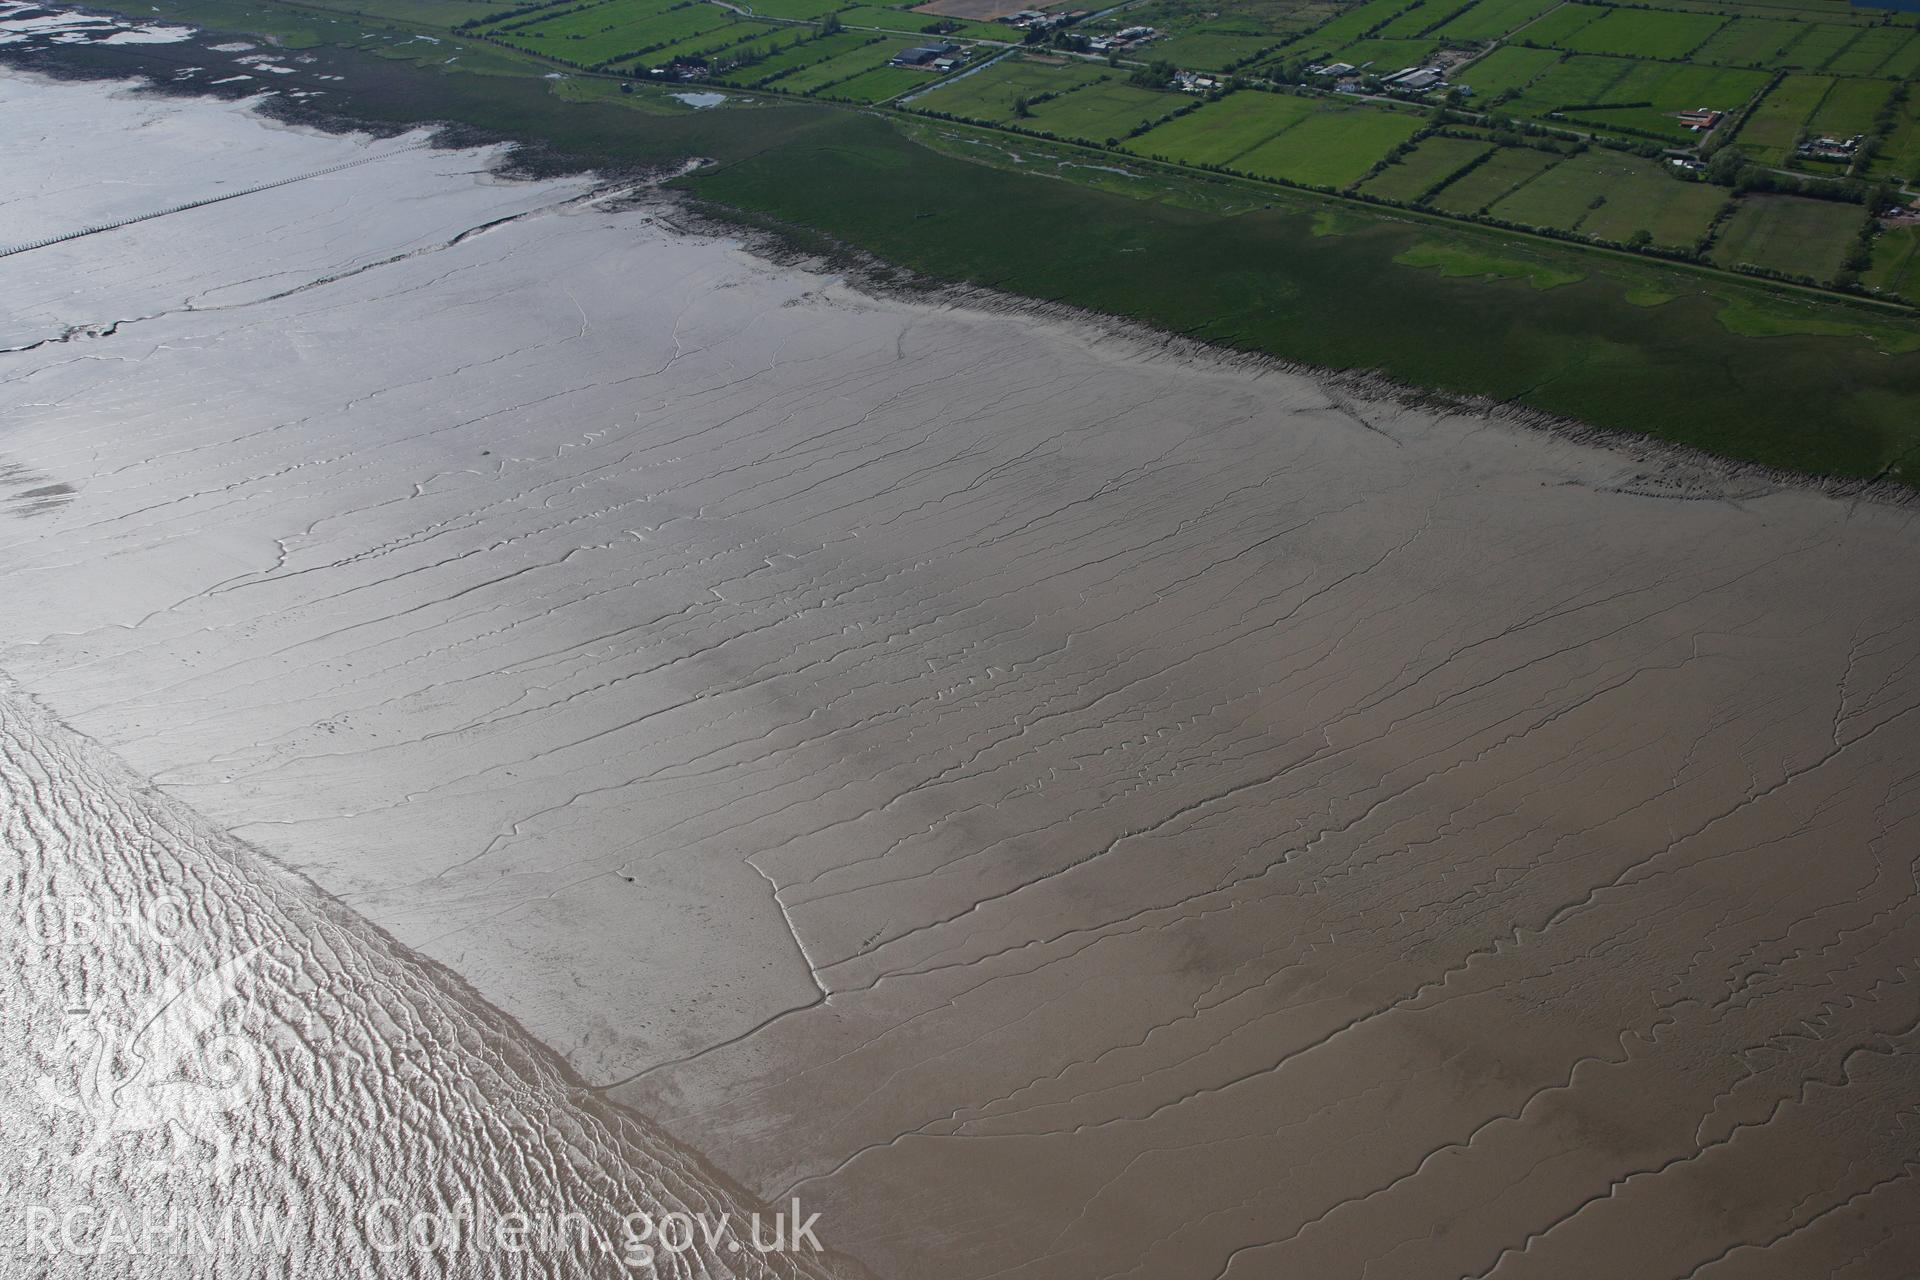 RCAHMW colour oblique photograph of Wentlooge Levels and intertidal area. Taken by Toby Driver on 22/05/2012.